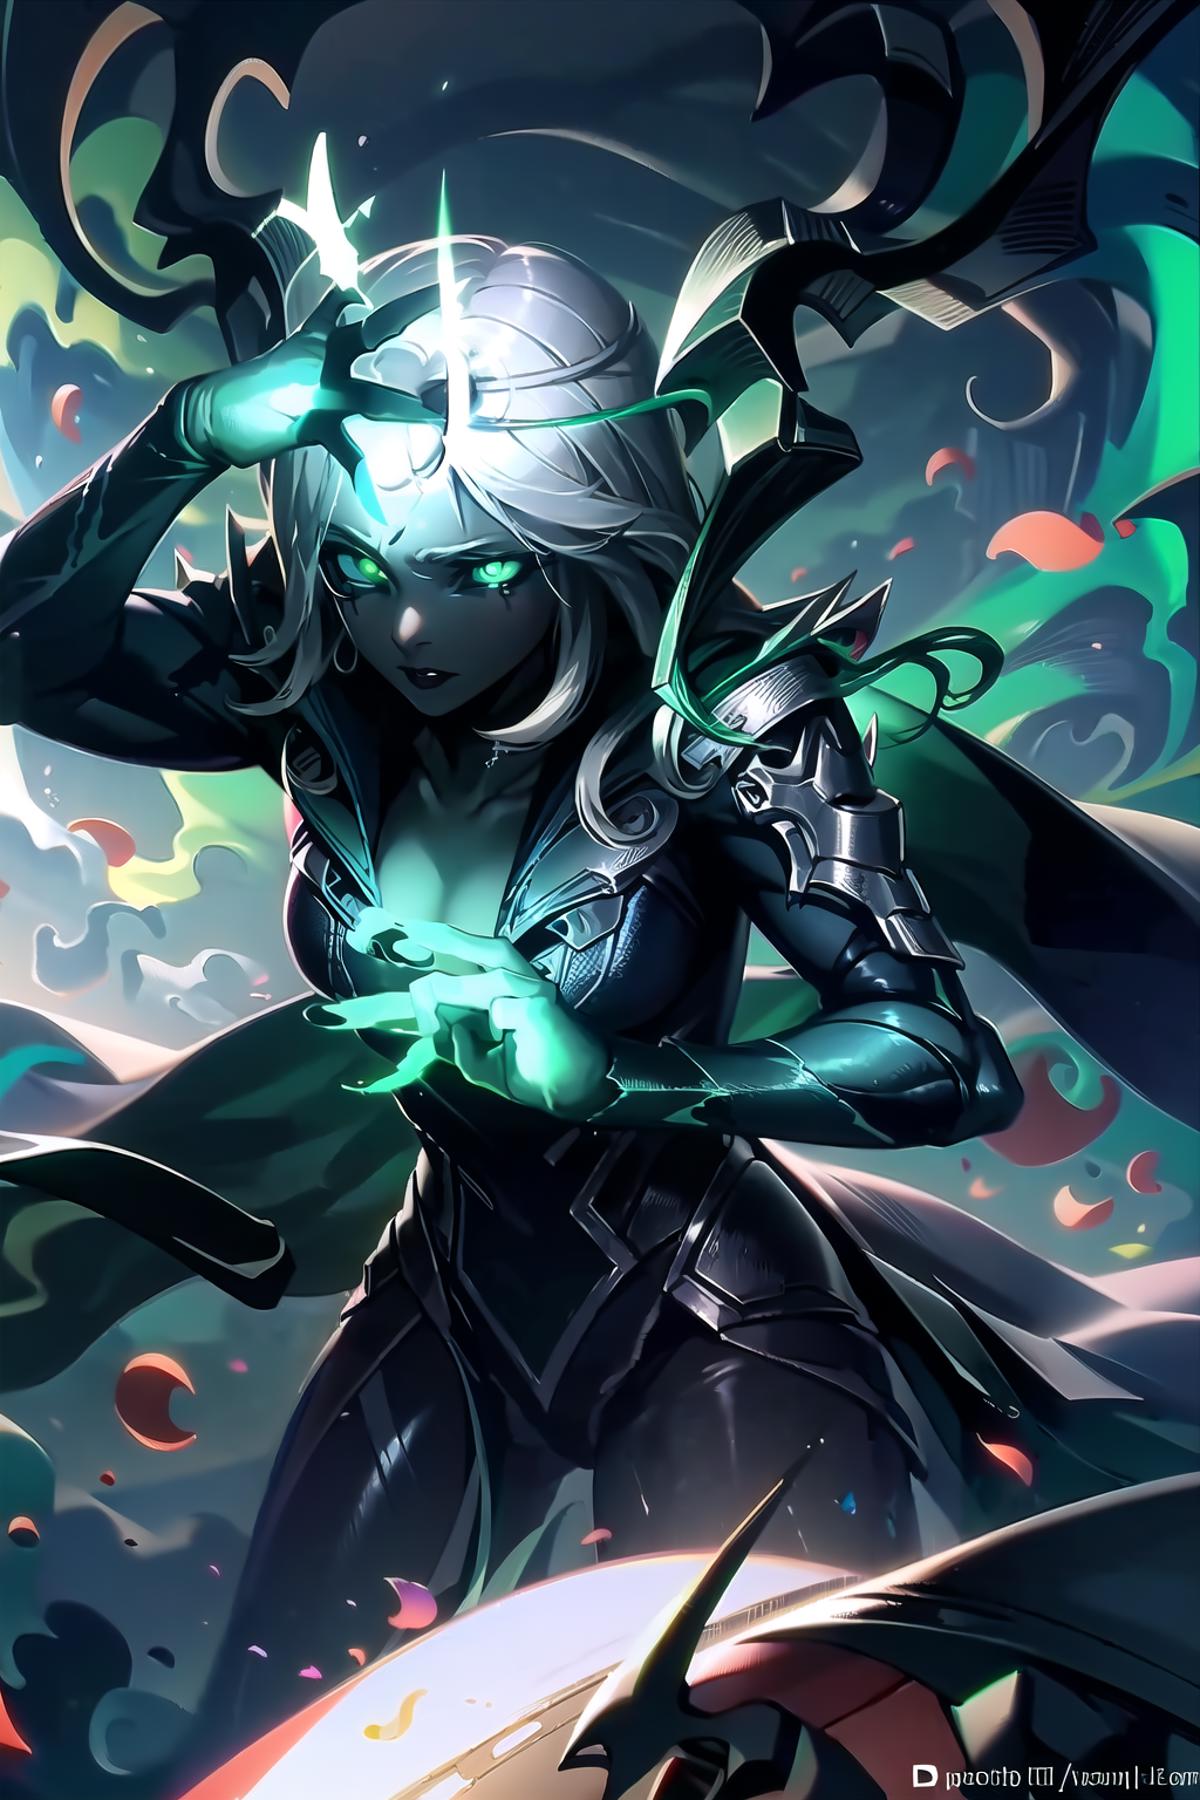 Change-A-Character: The Ruination of League of Legends, You Waifu Has Been Corrupted By The Black Mist! image by TwoMoreTimes89